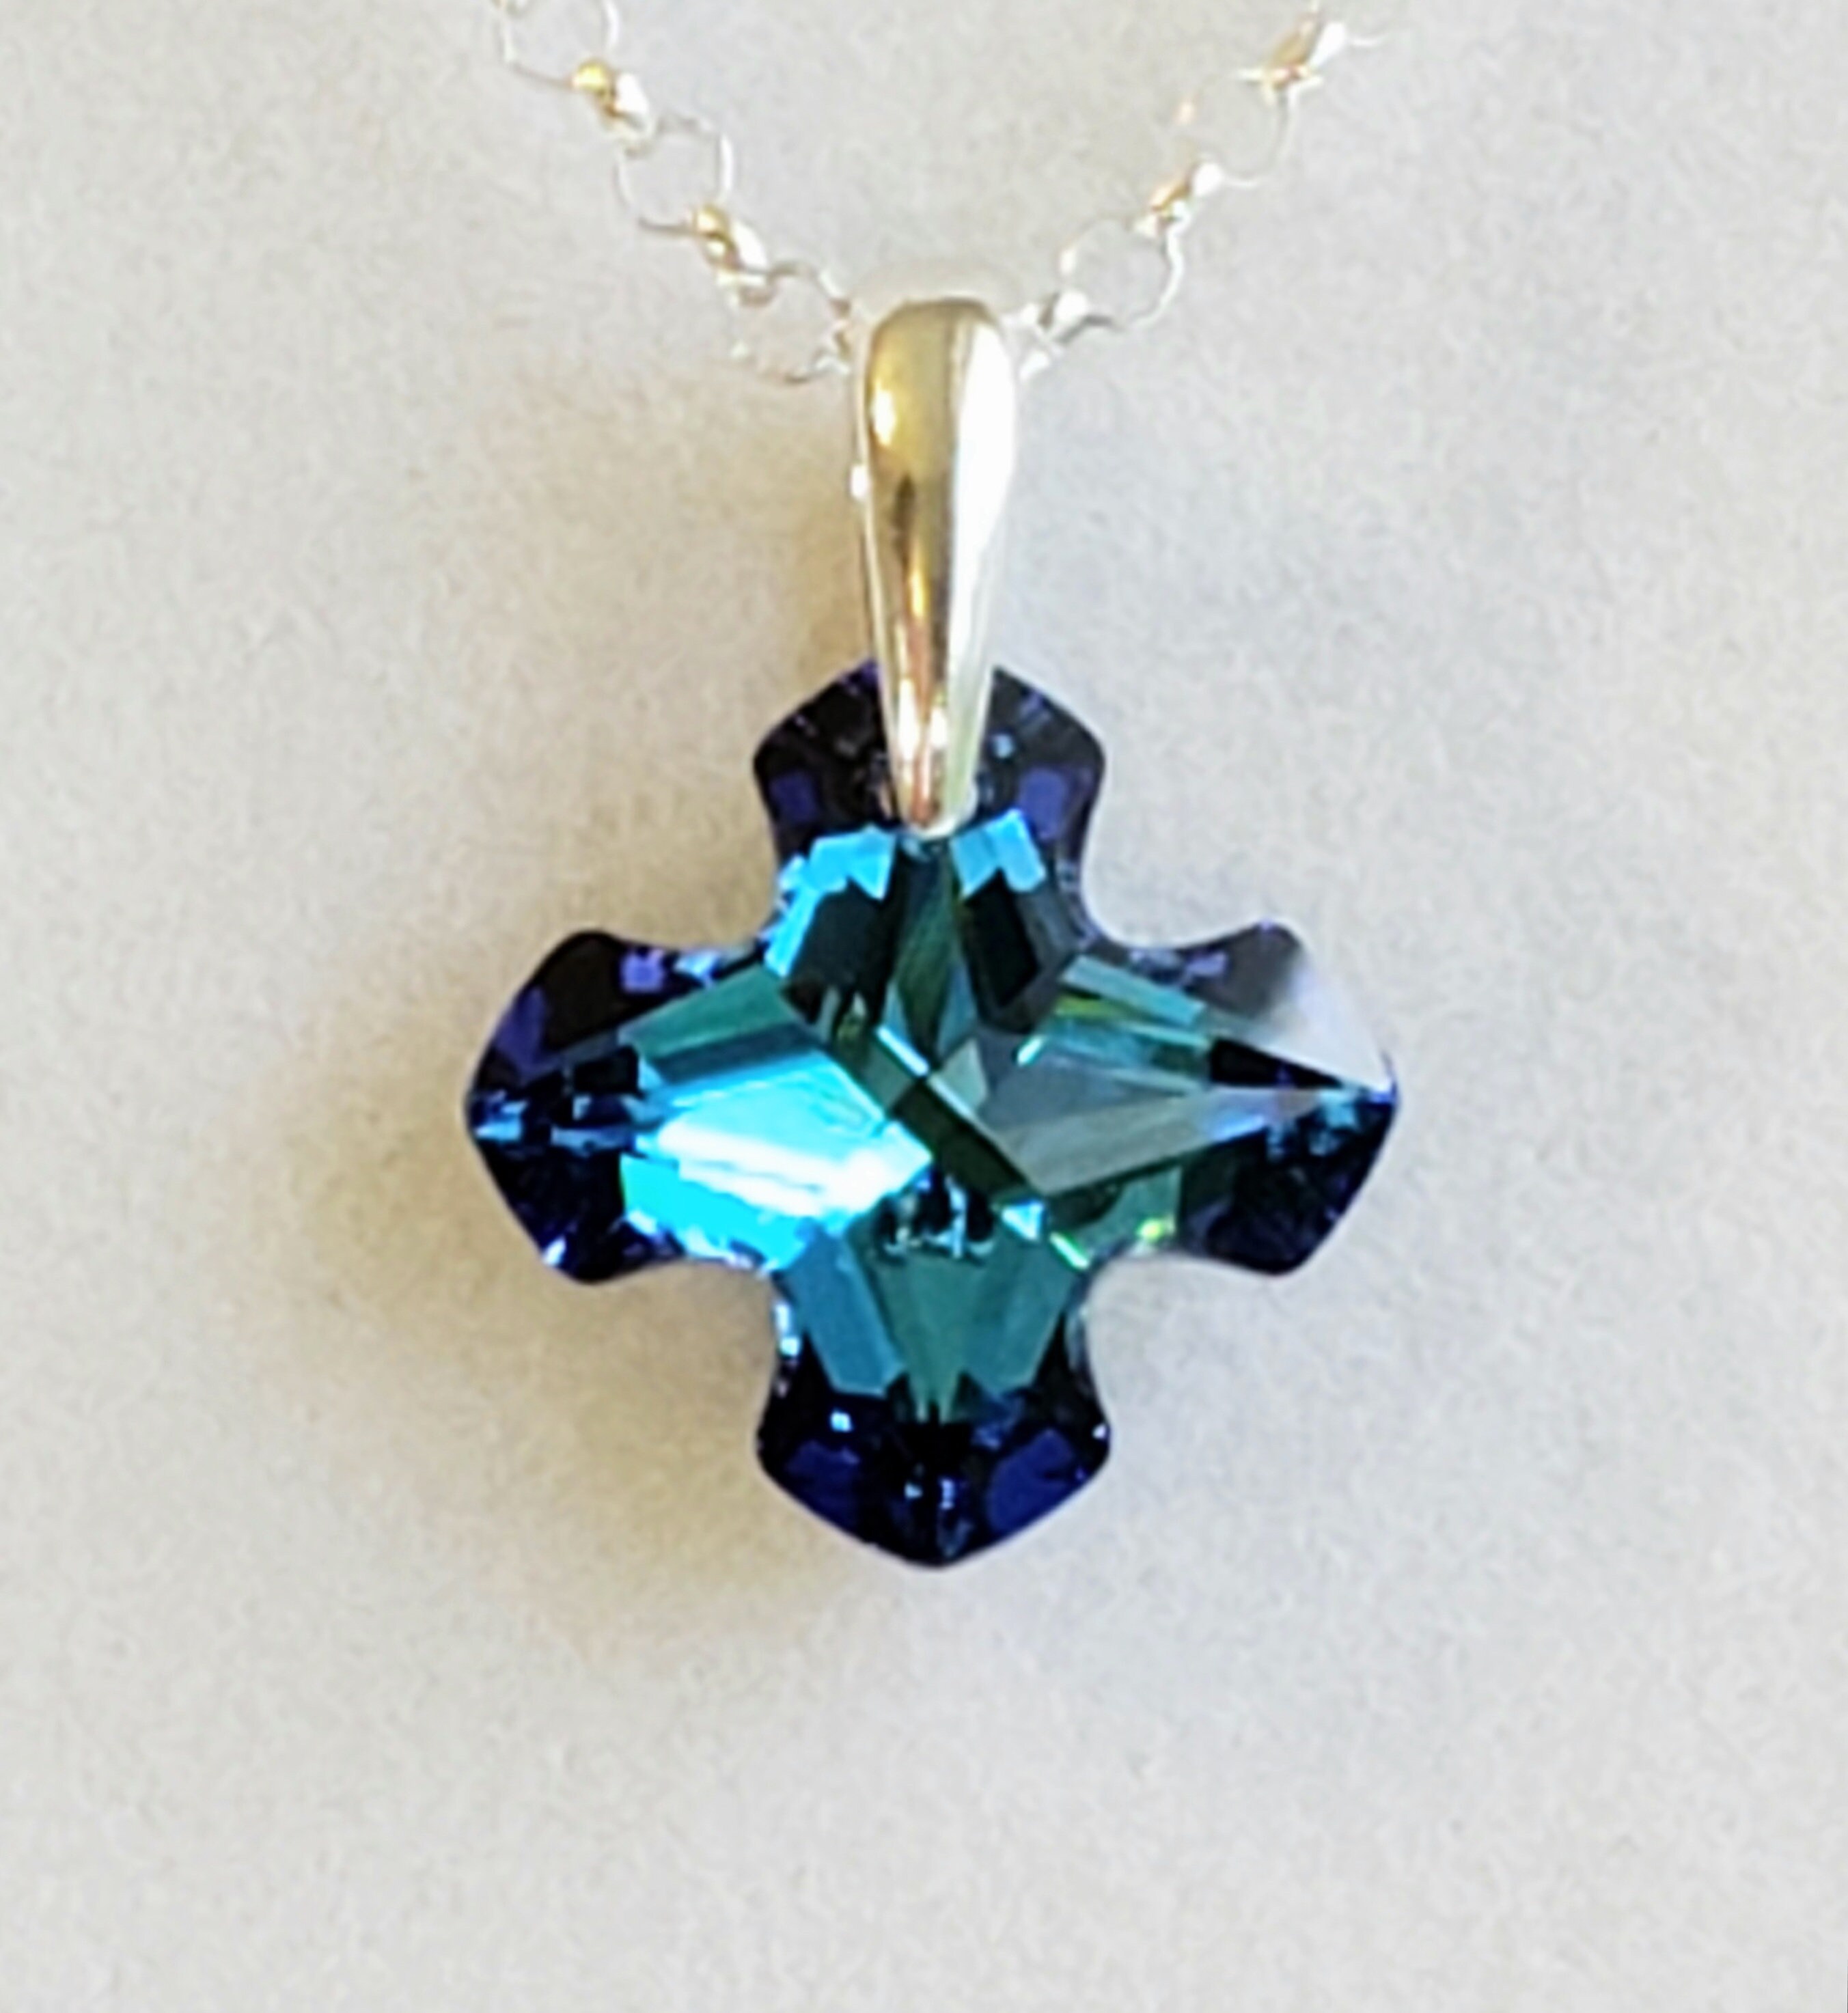 Swarovski Crystal Blue and Filigree Necklace – Char's Favorite Things